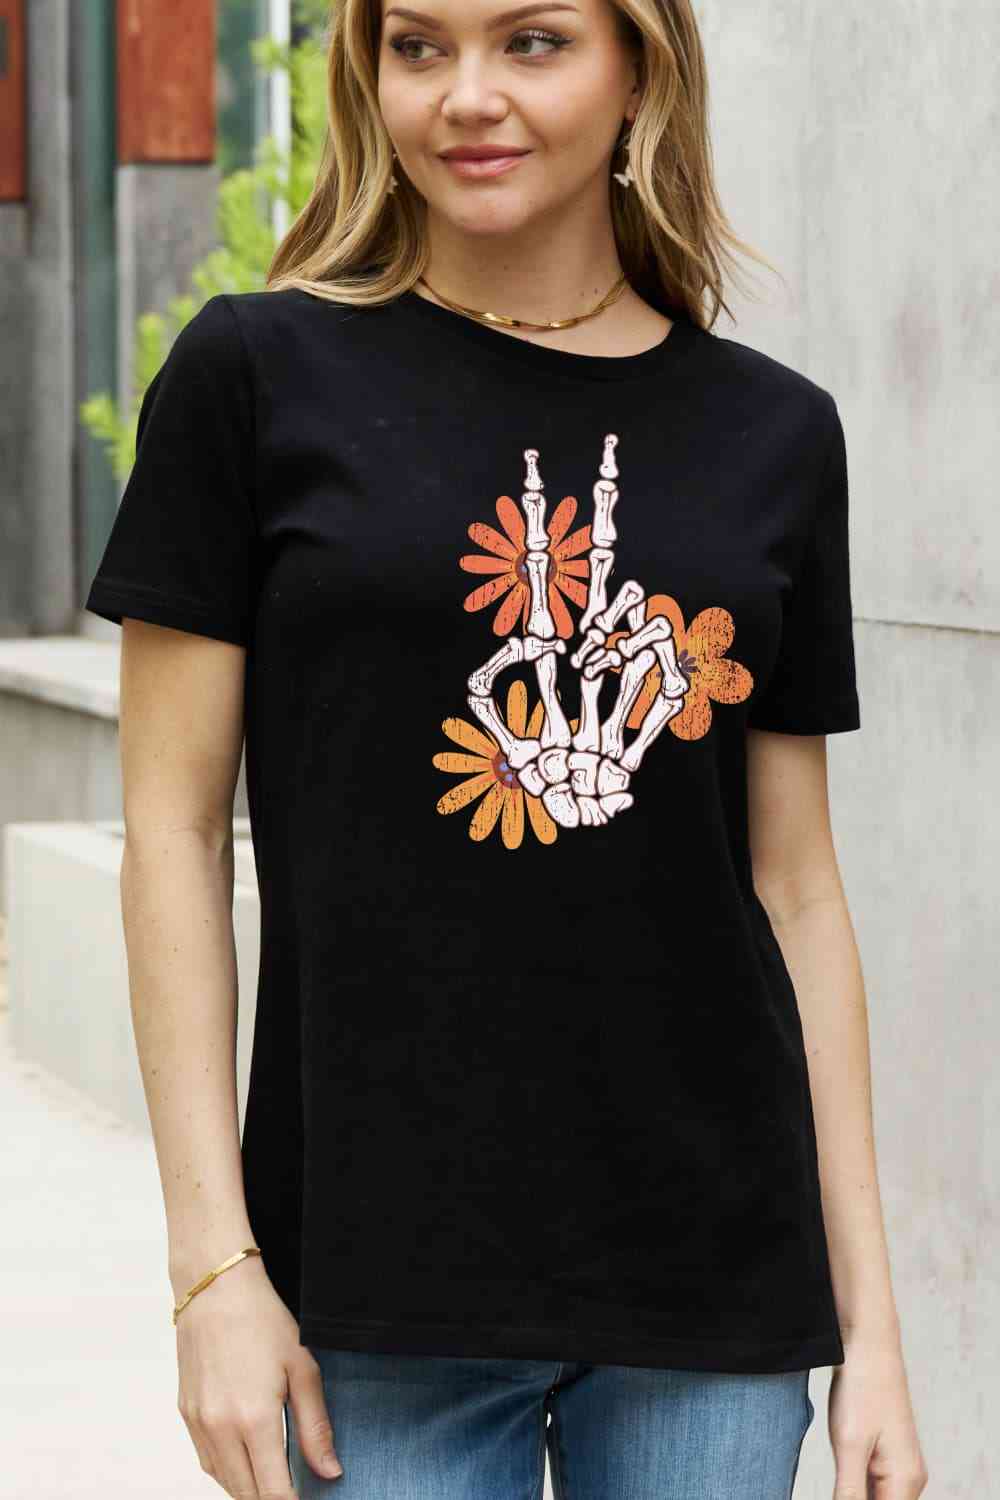 Simply Love Full Size Skeleton Hand Graphic Cotton Tee